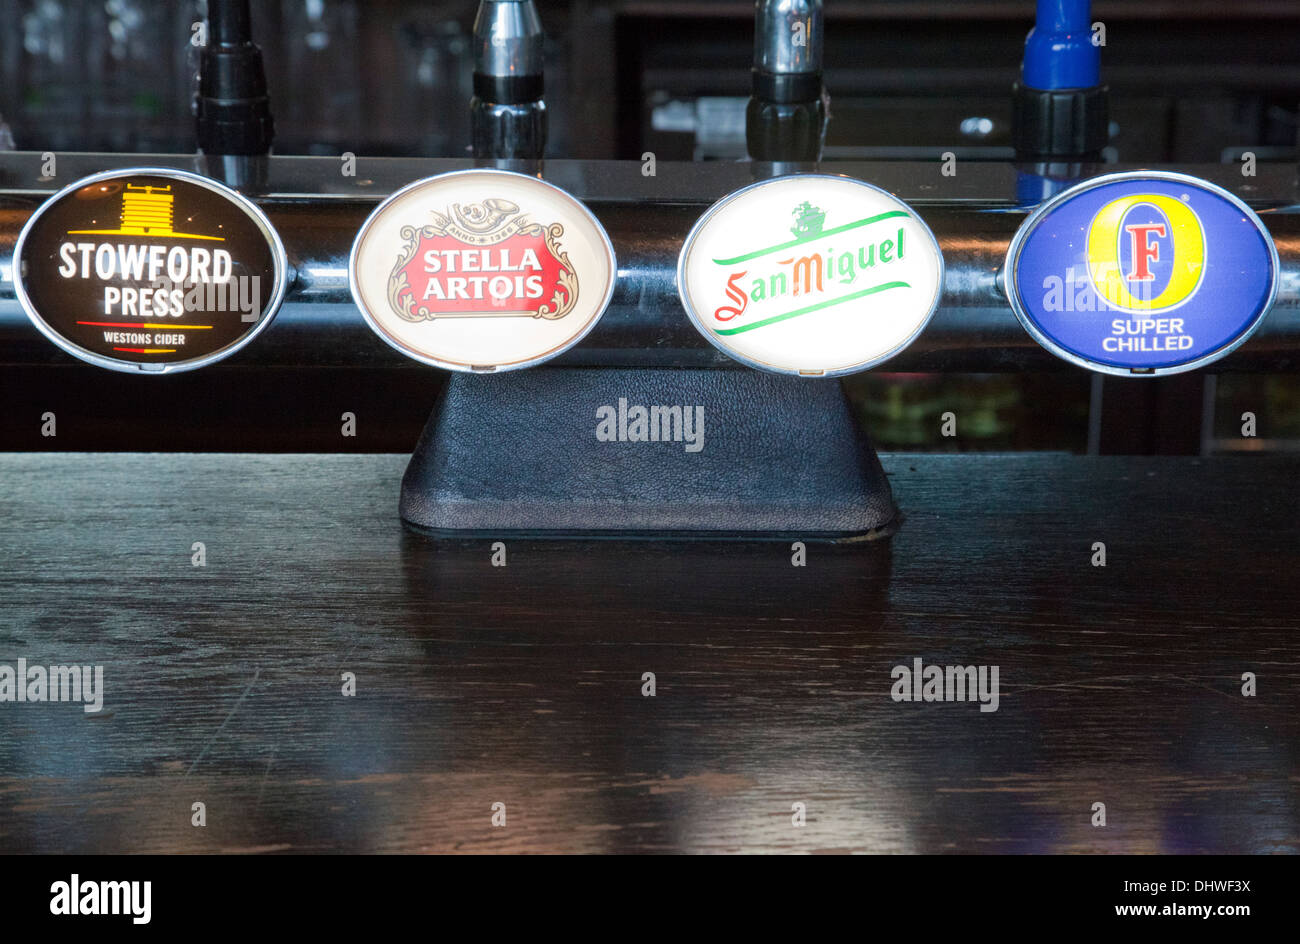 Beer on tap at London Pub - London UK Stock Photo